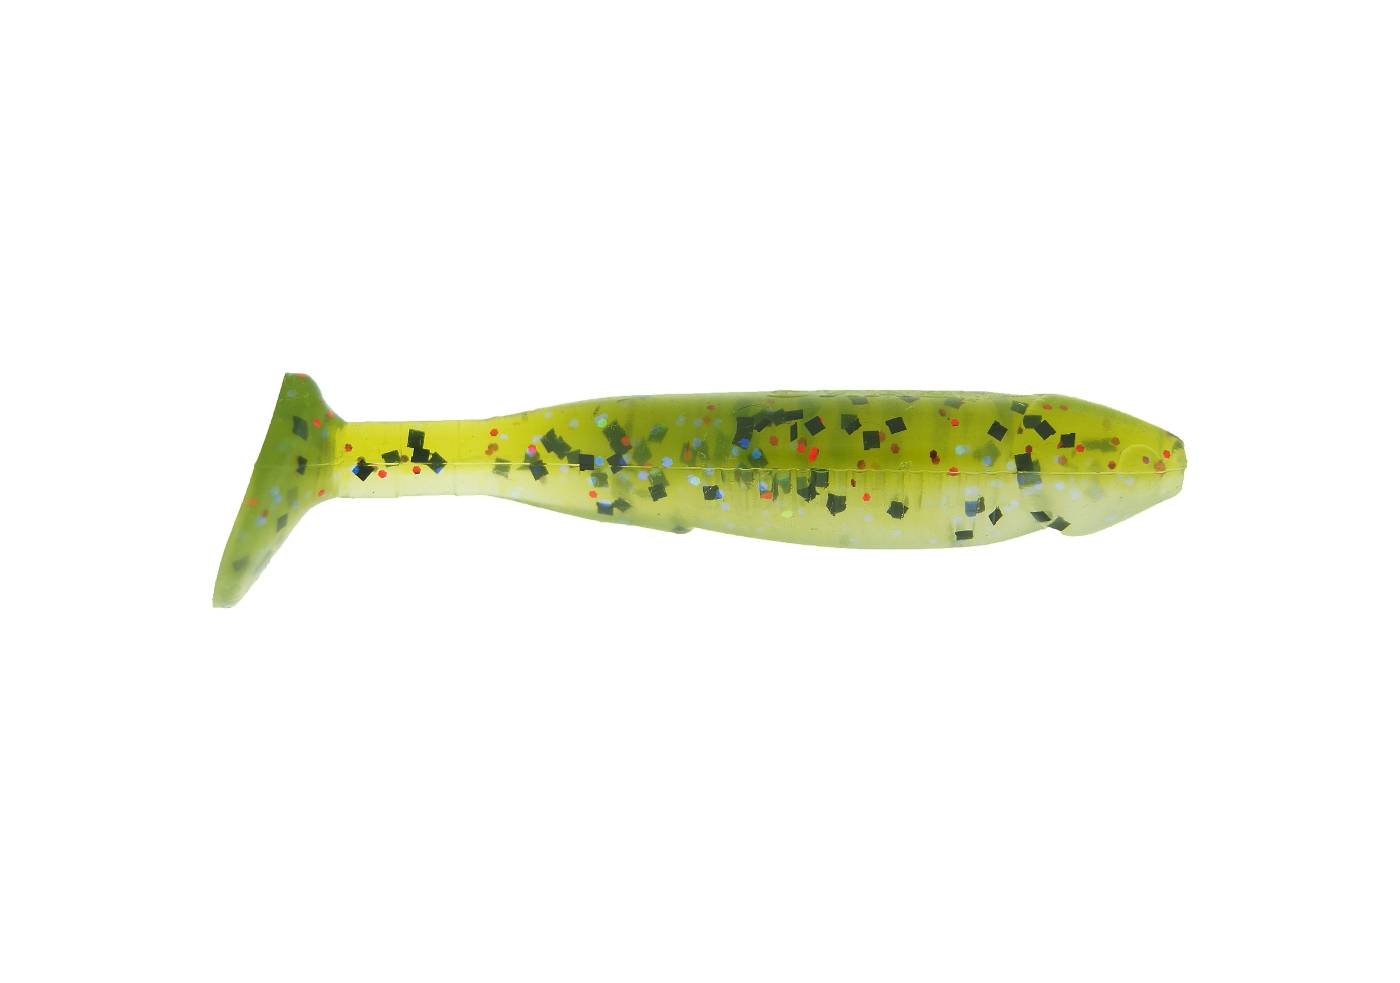 https://specimenfishing-uk.com/wp-content/uploads/images/products/products-Crappie-Dapper-Hammertime.jpg